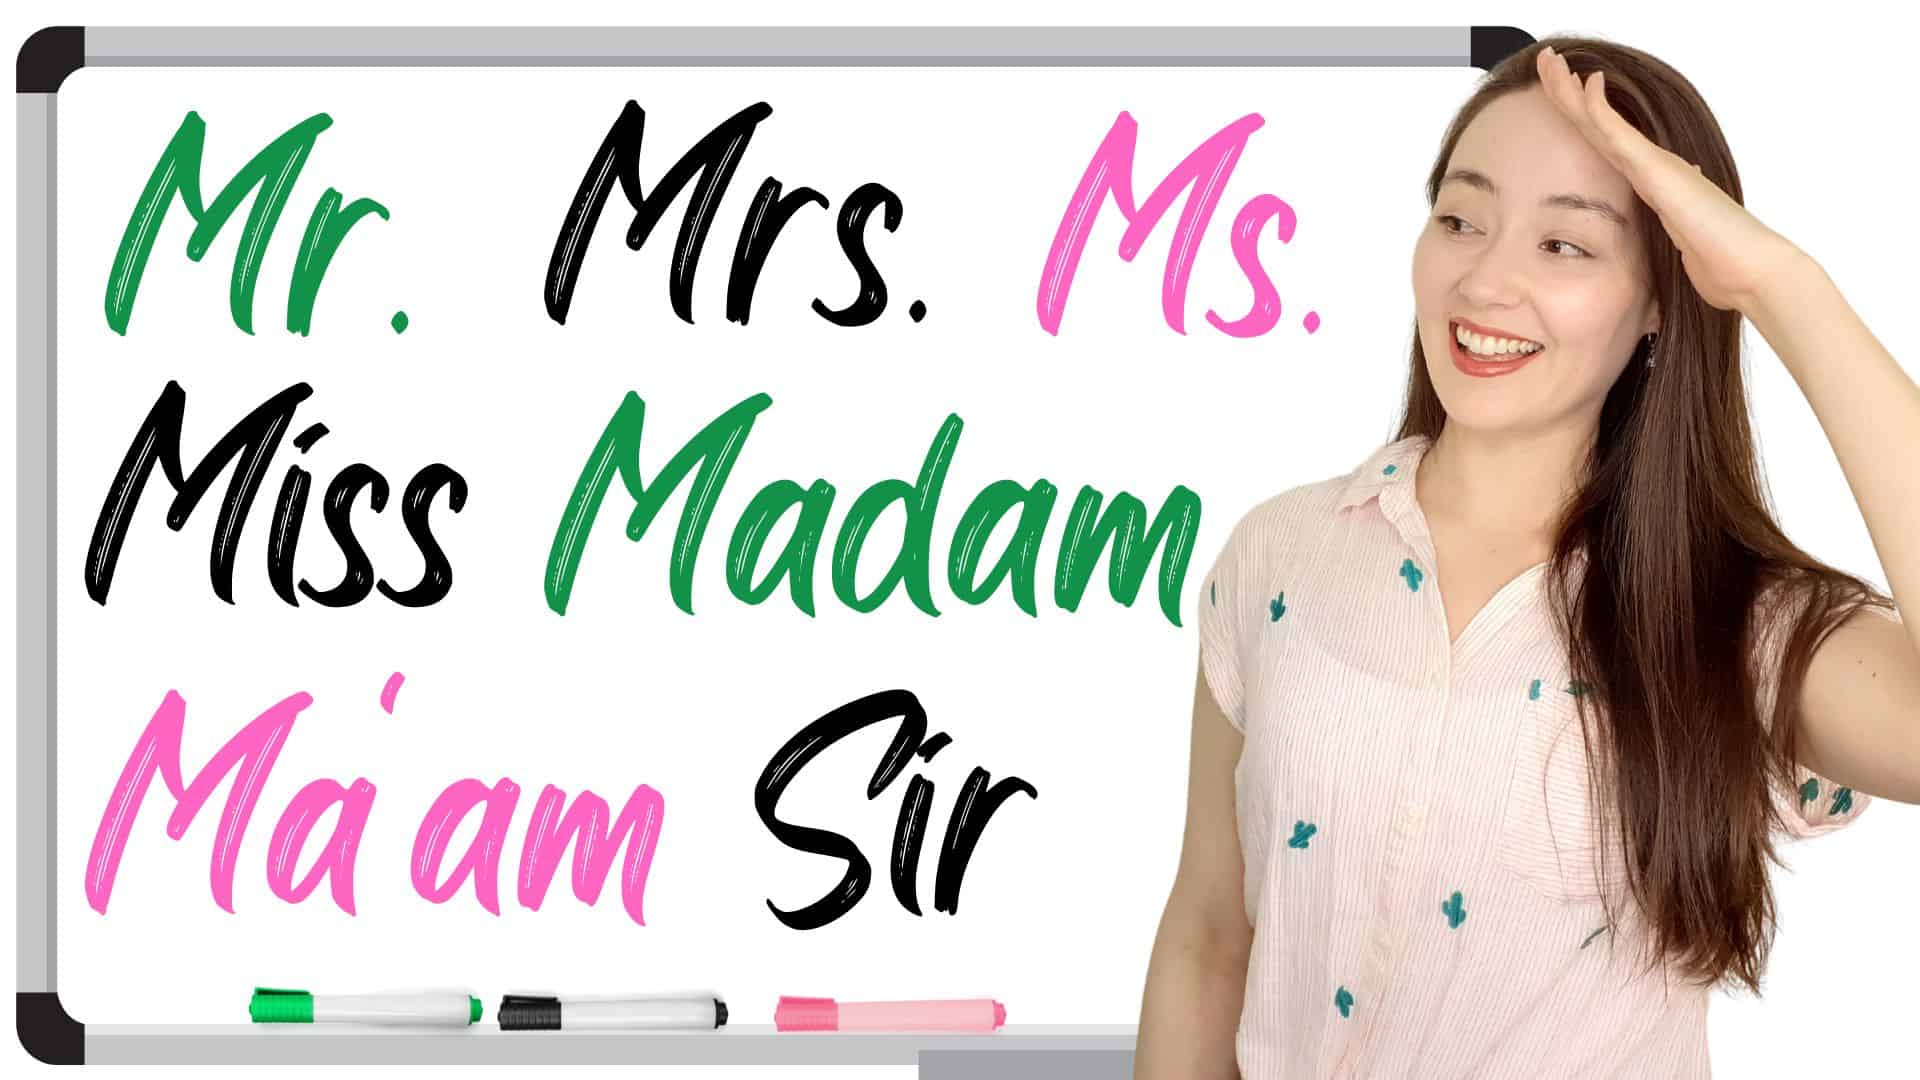 Miss, Mrs., Ms., Madam, Mr. – How do I use them correctly? | plus video lesson!